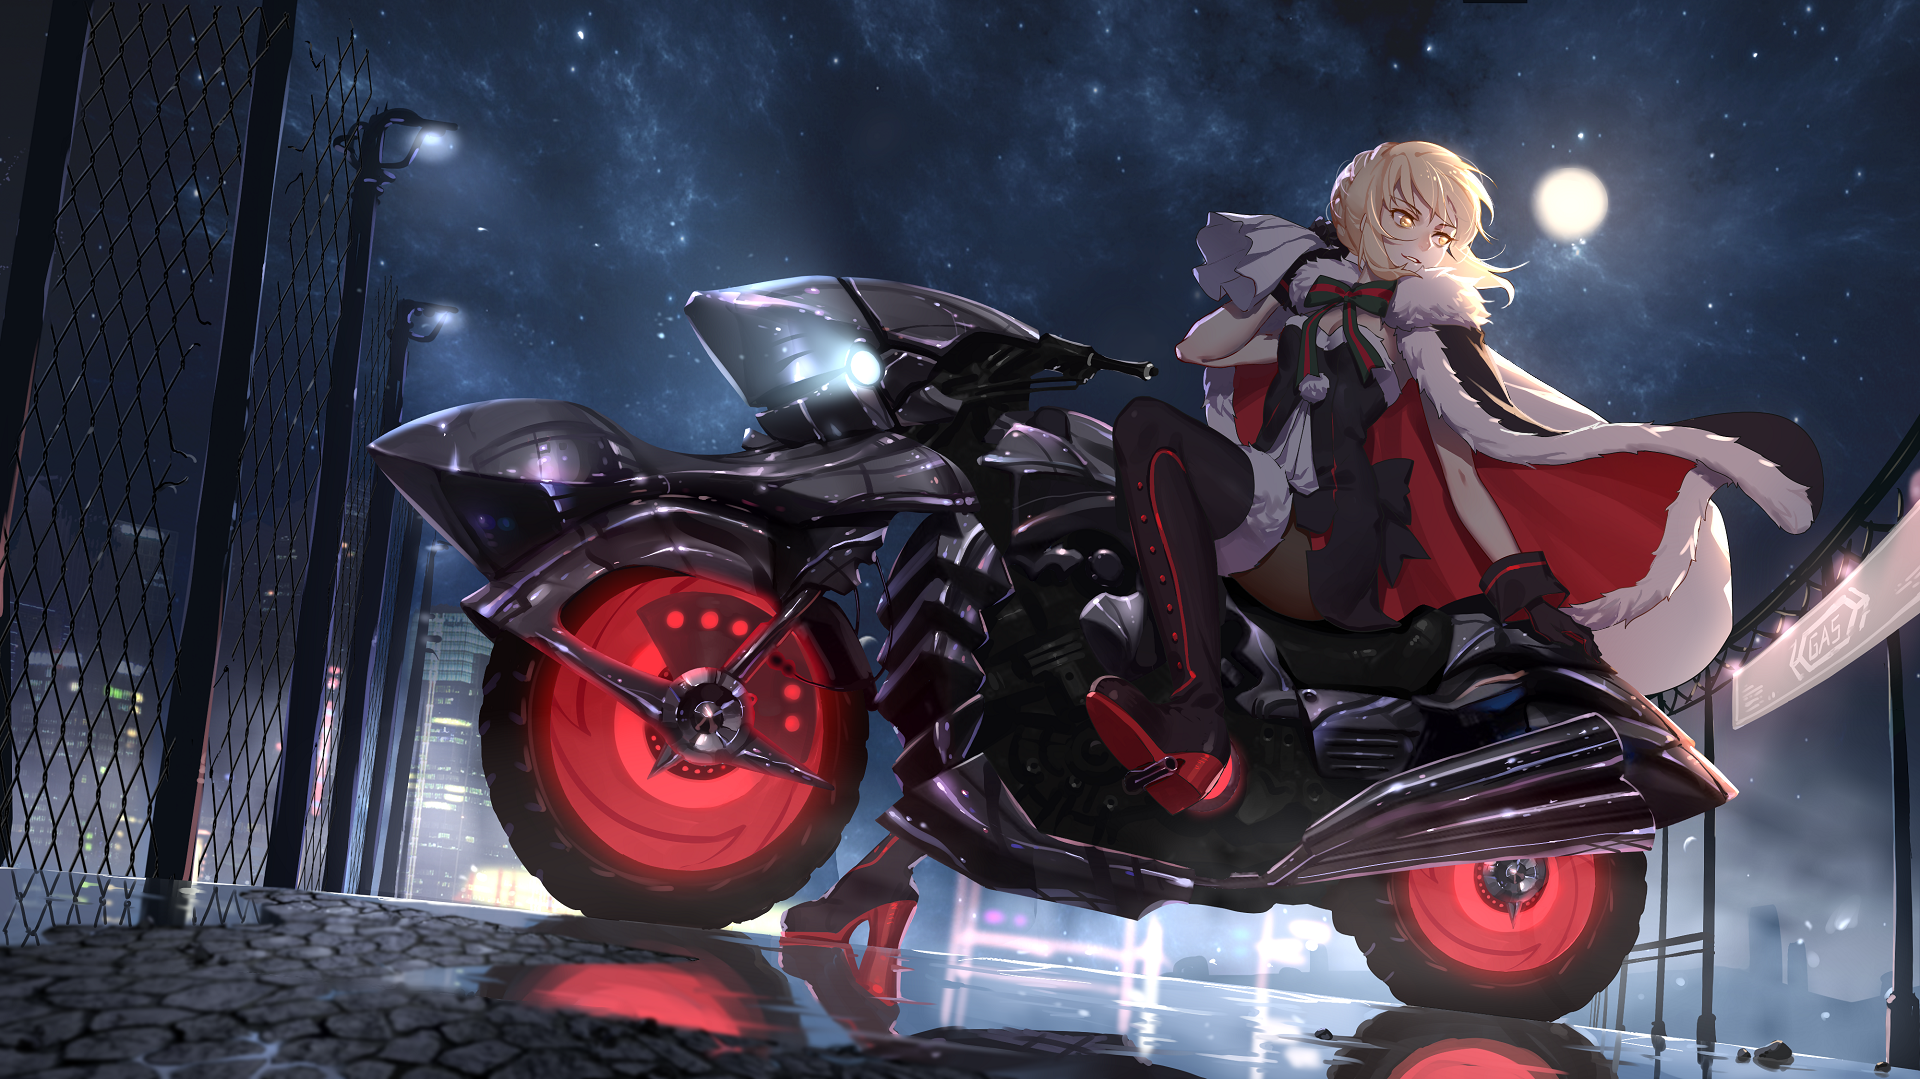 Cool anime girl driving a motorcycle | Anime motorcycle, Bike drawing,  Motorcycle illustration